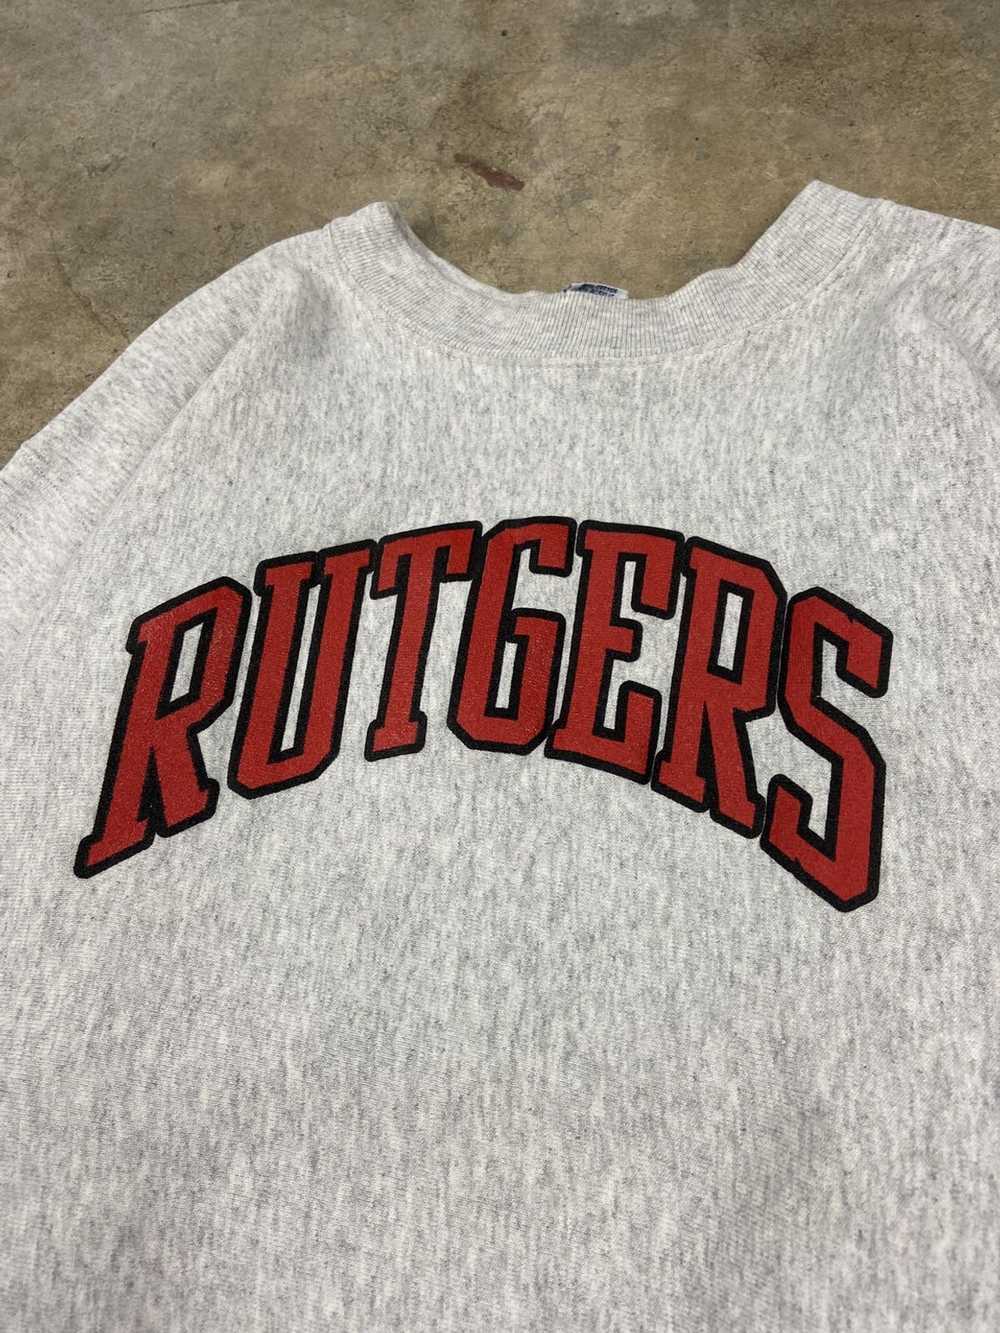 Made In Usa × Vintage Vintage 90s Rutgers univers… - image 3